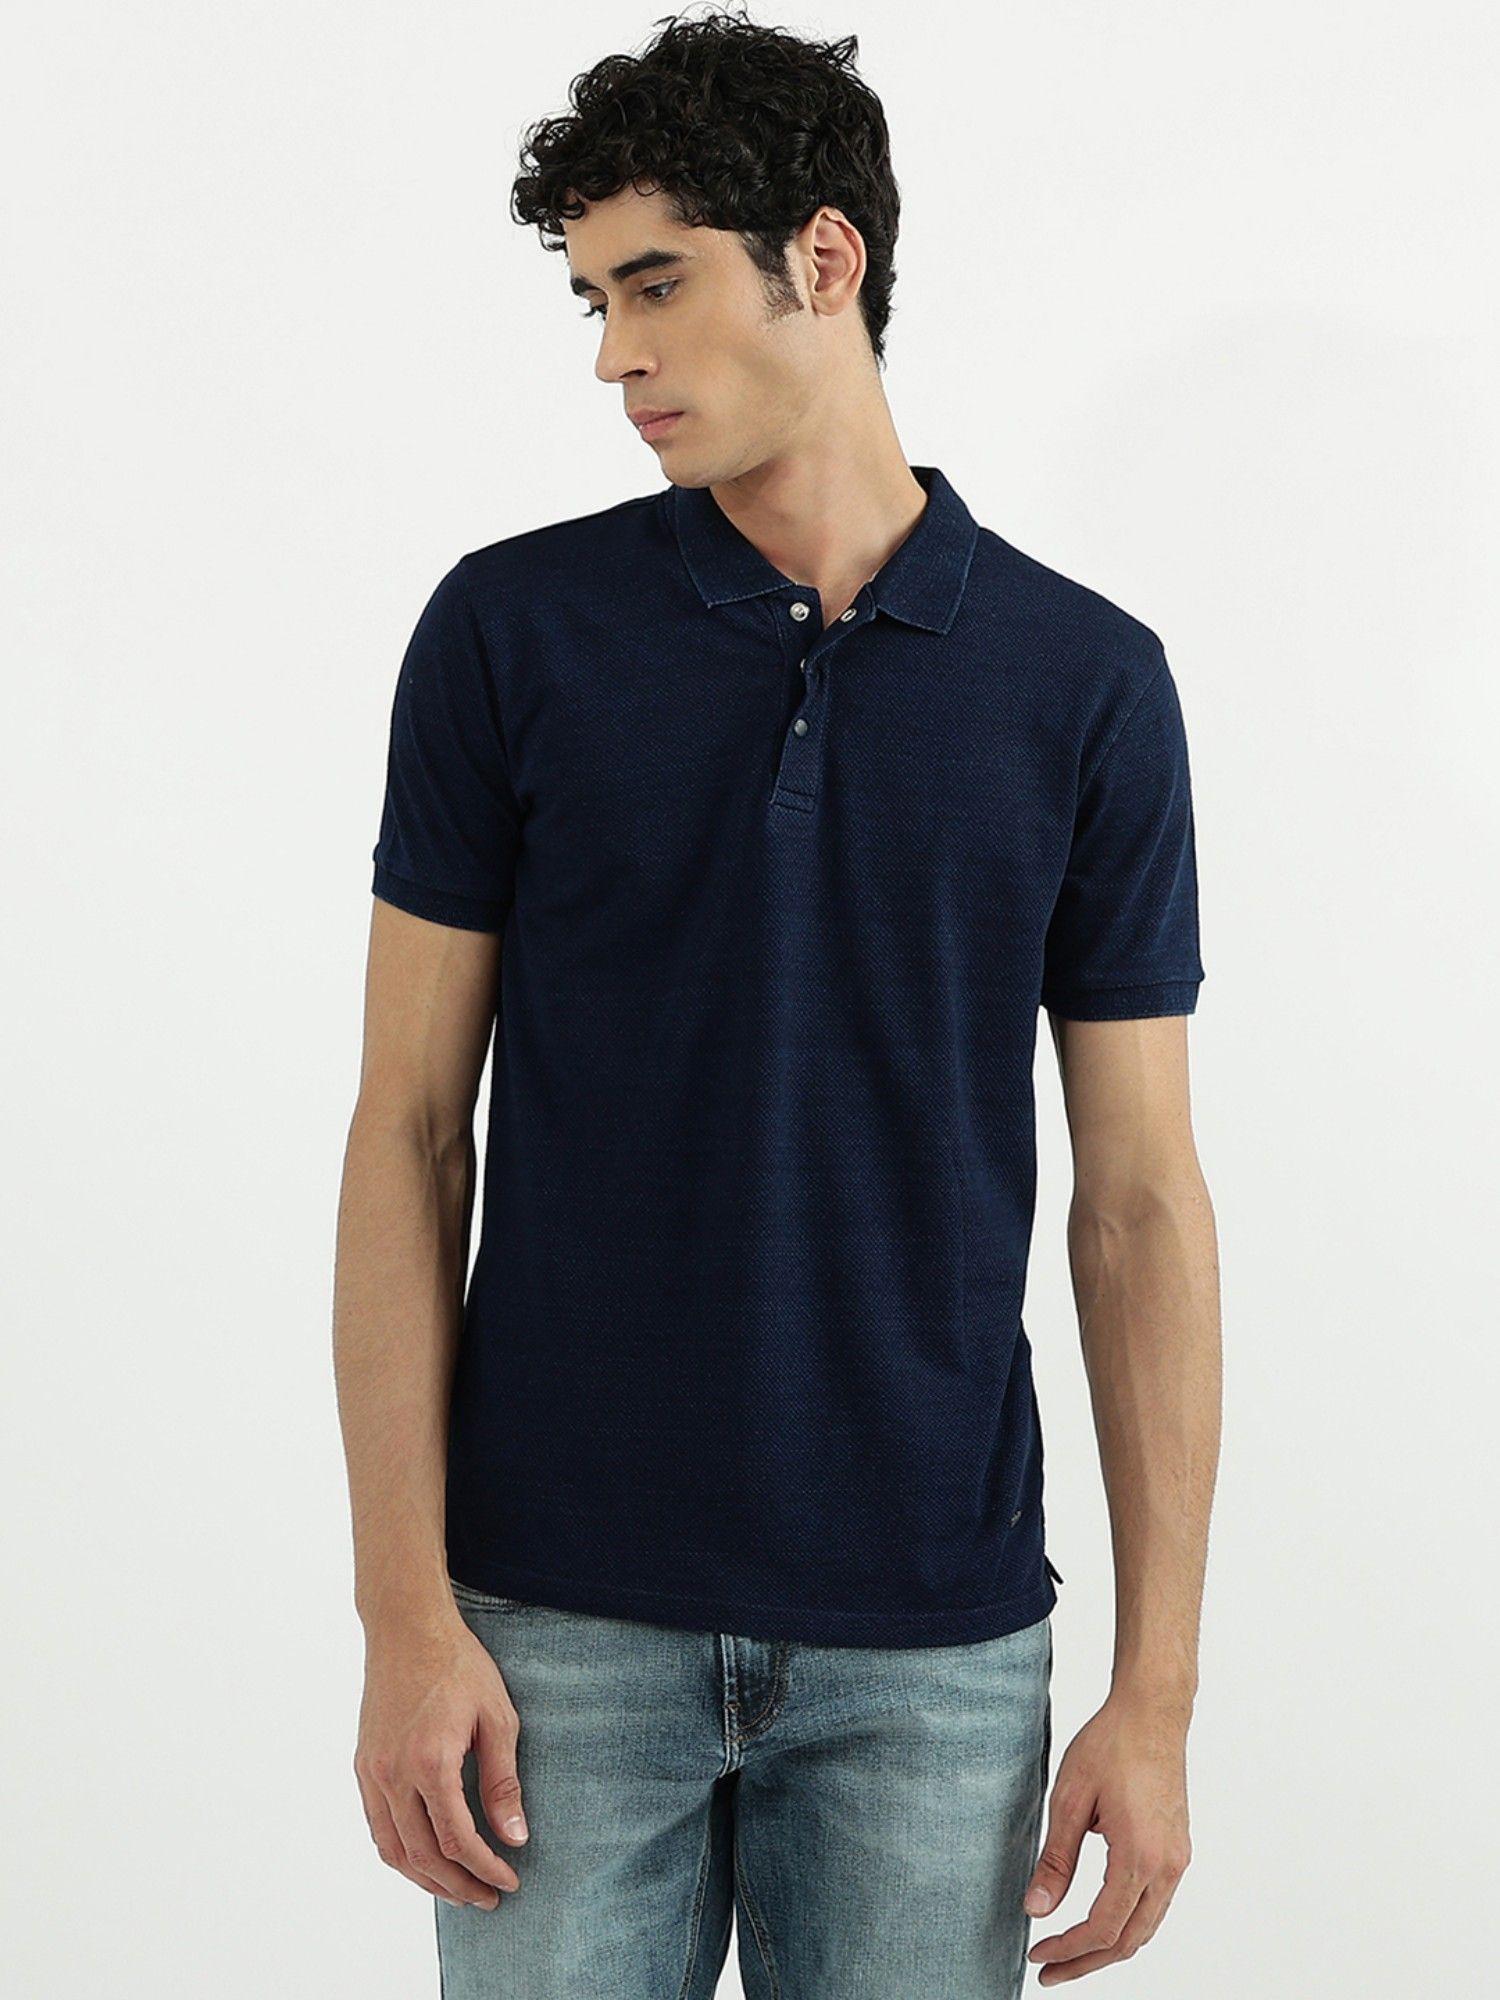 men solid polo t-shirt navy blue